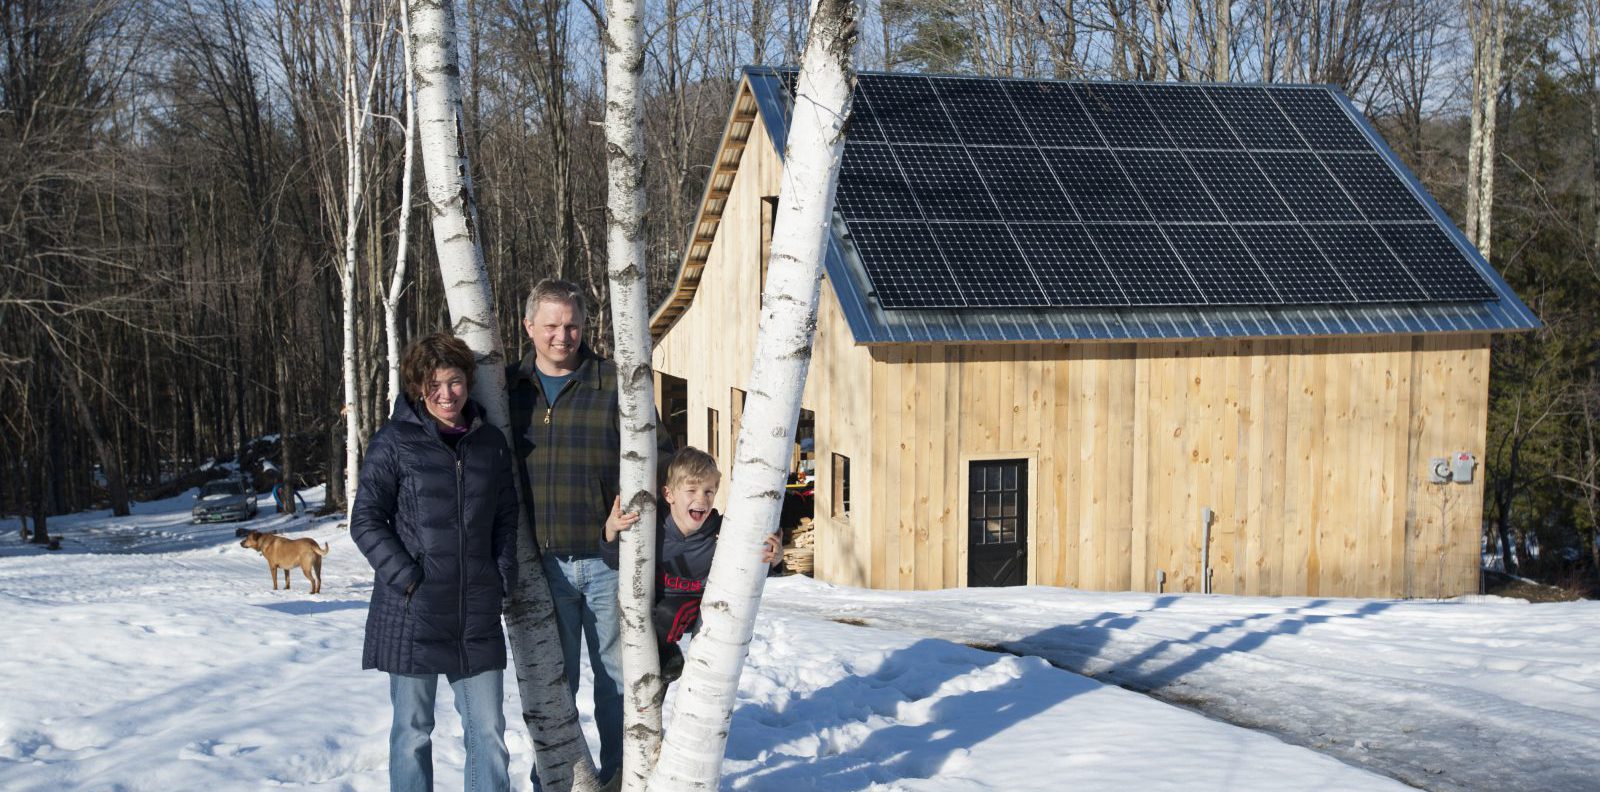 solar increase home value in new york and vermont